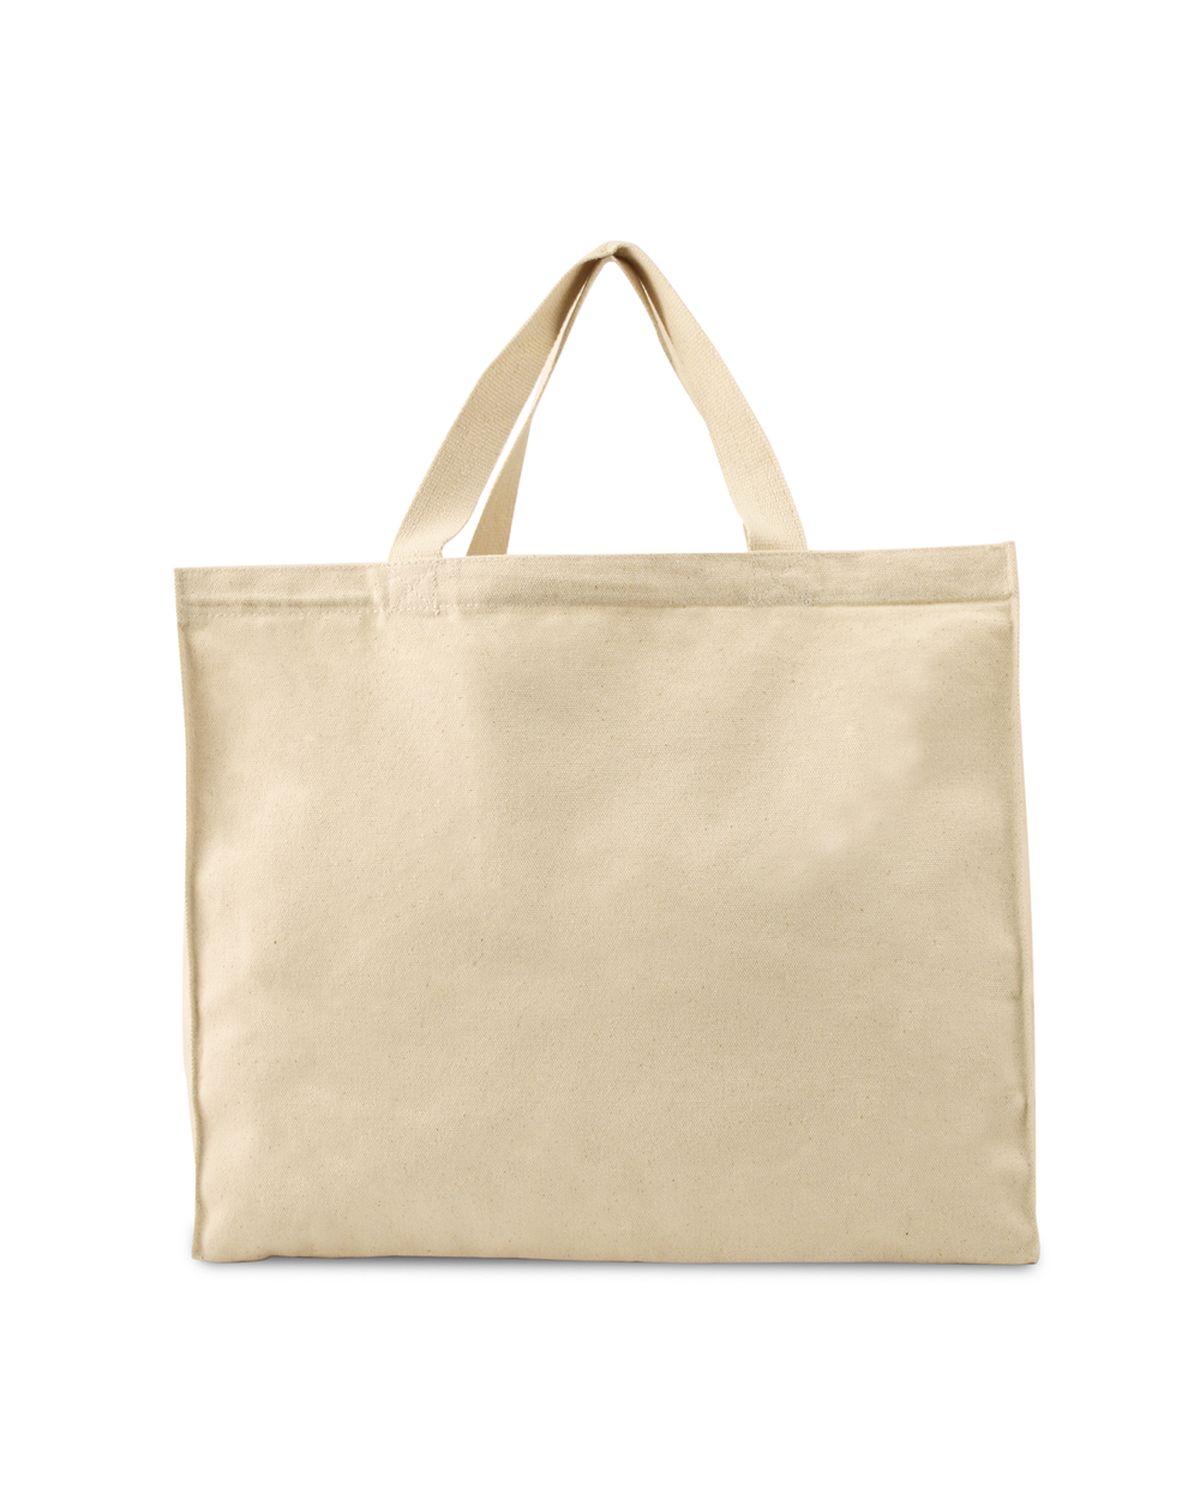 'Liberty Bags 8501 Gusseted Canvas Tote'